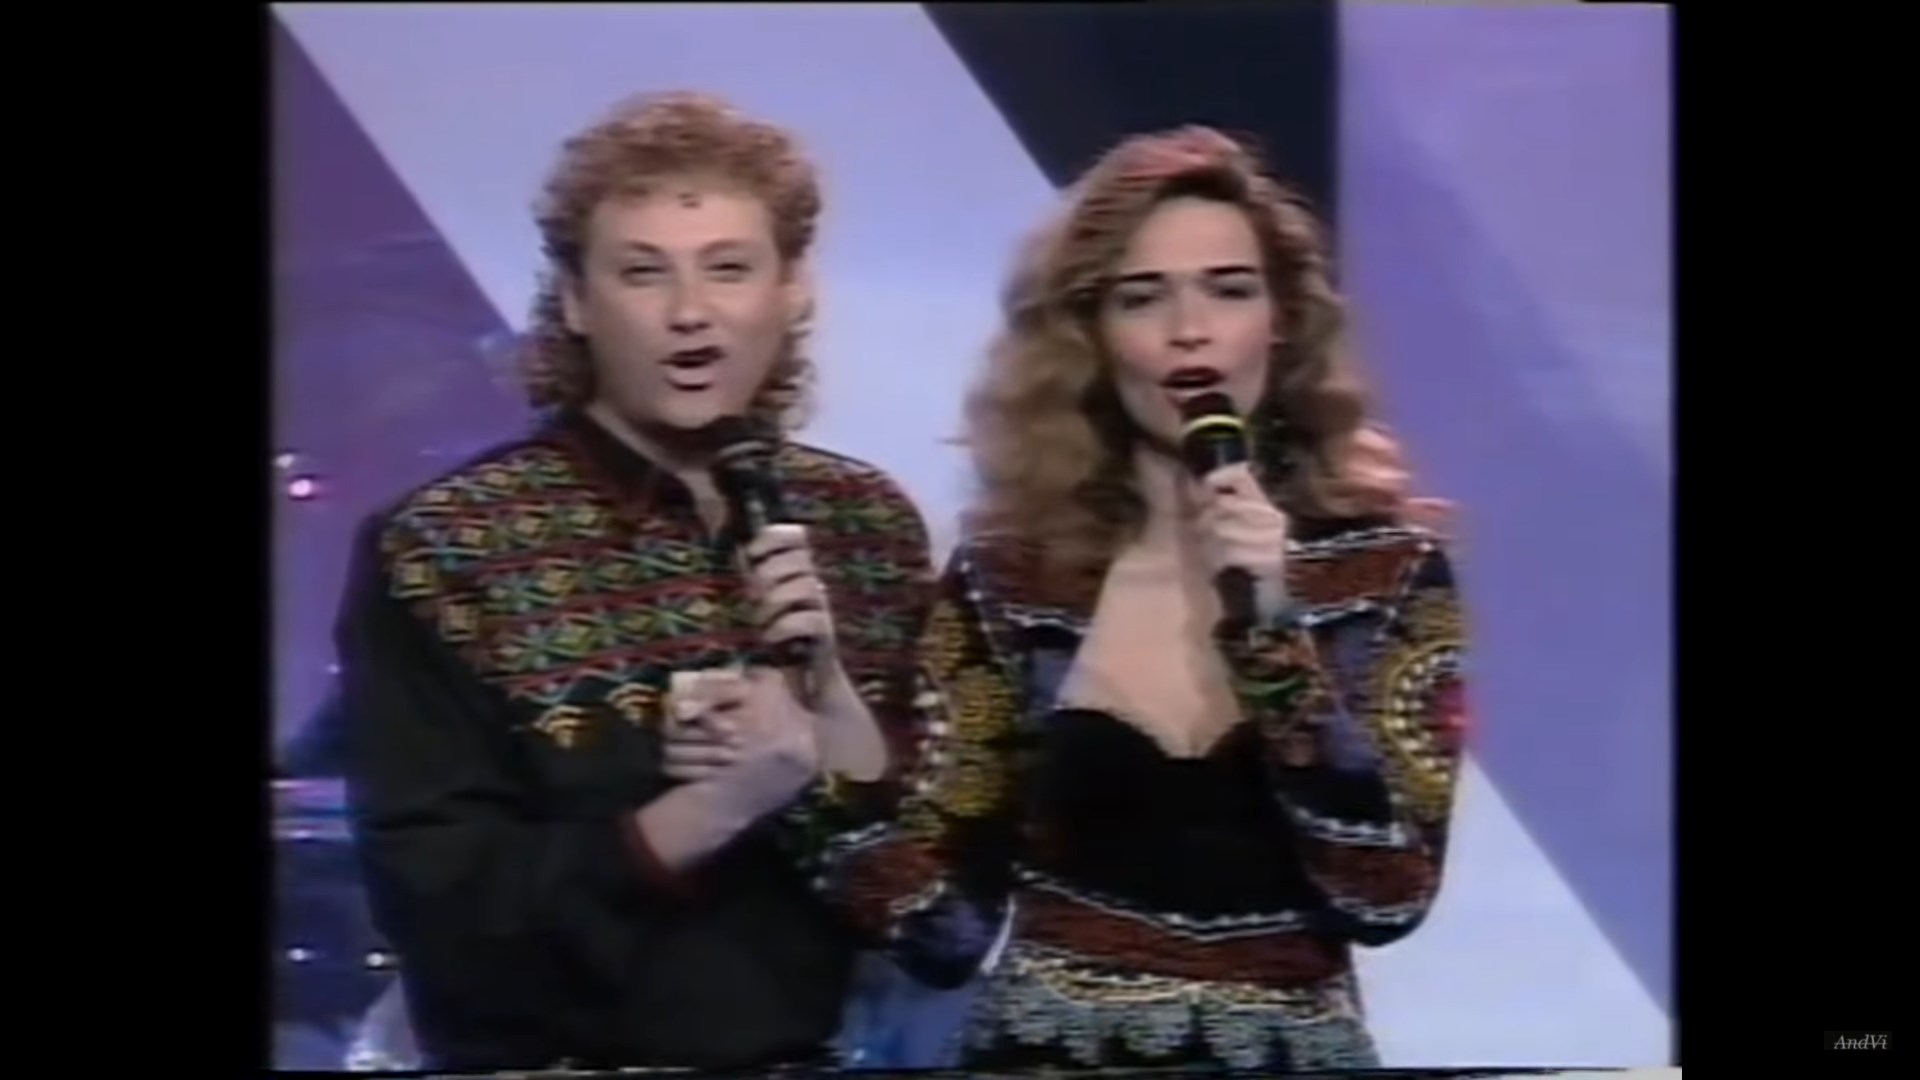 View Israeli culture as represented in the 1991 Eurovision